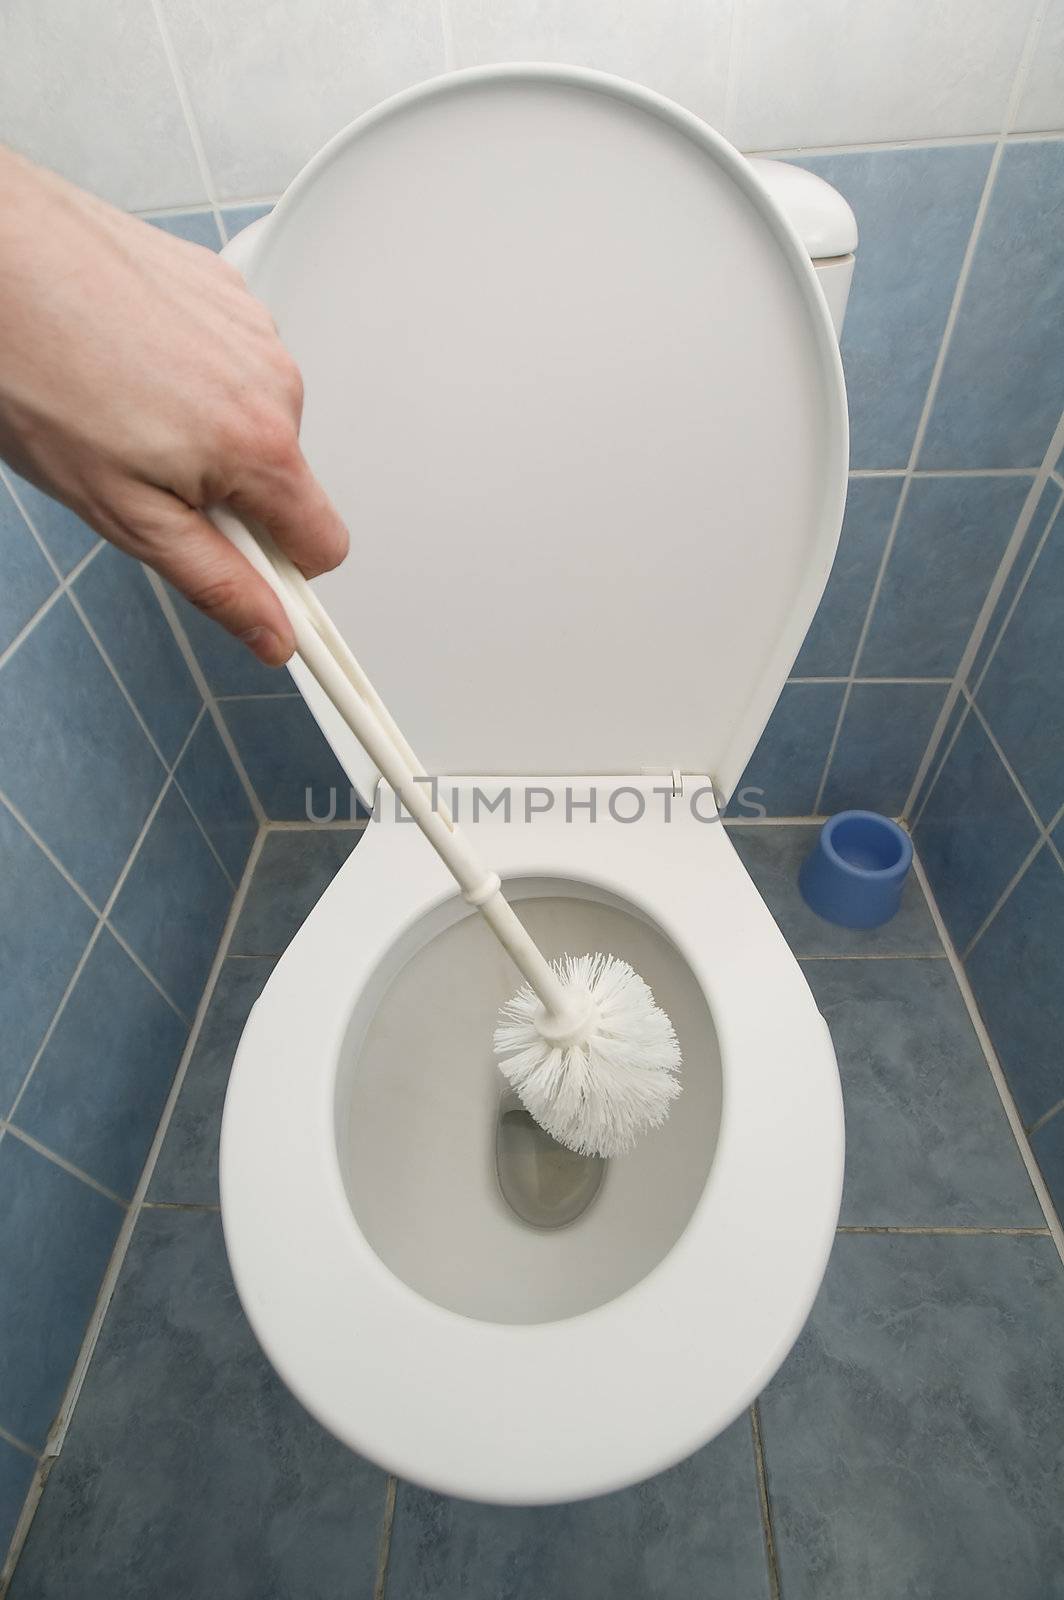 human hand holding a cleaning brush before white toilet, tiled floor and walls